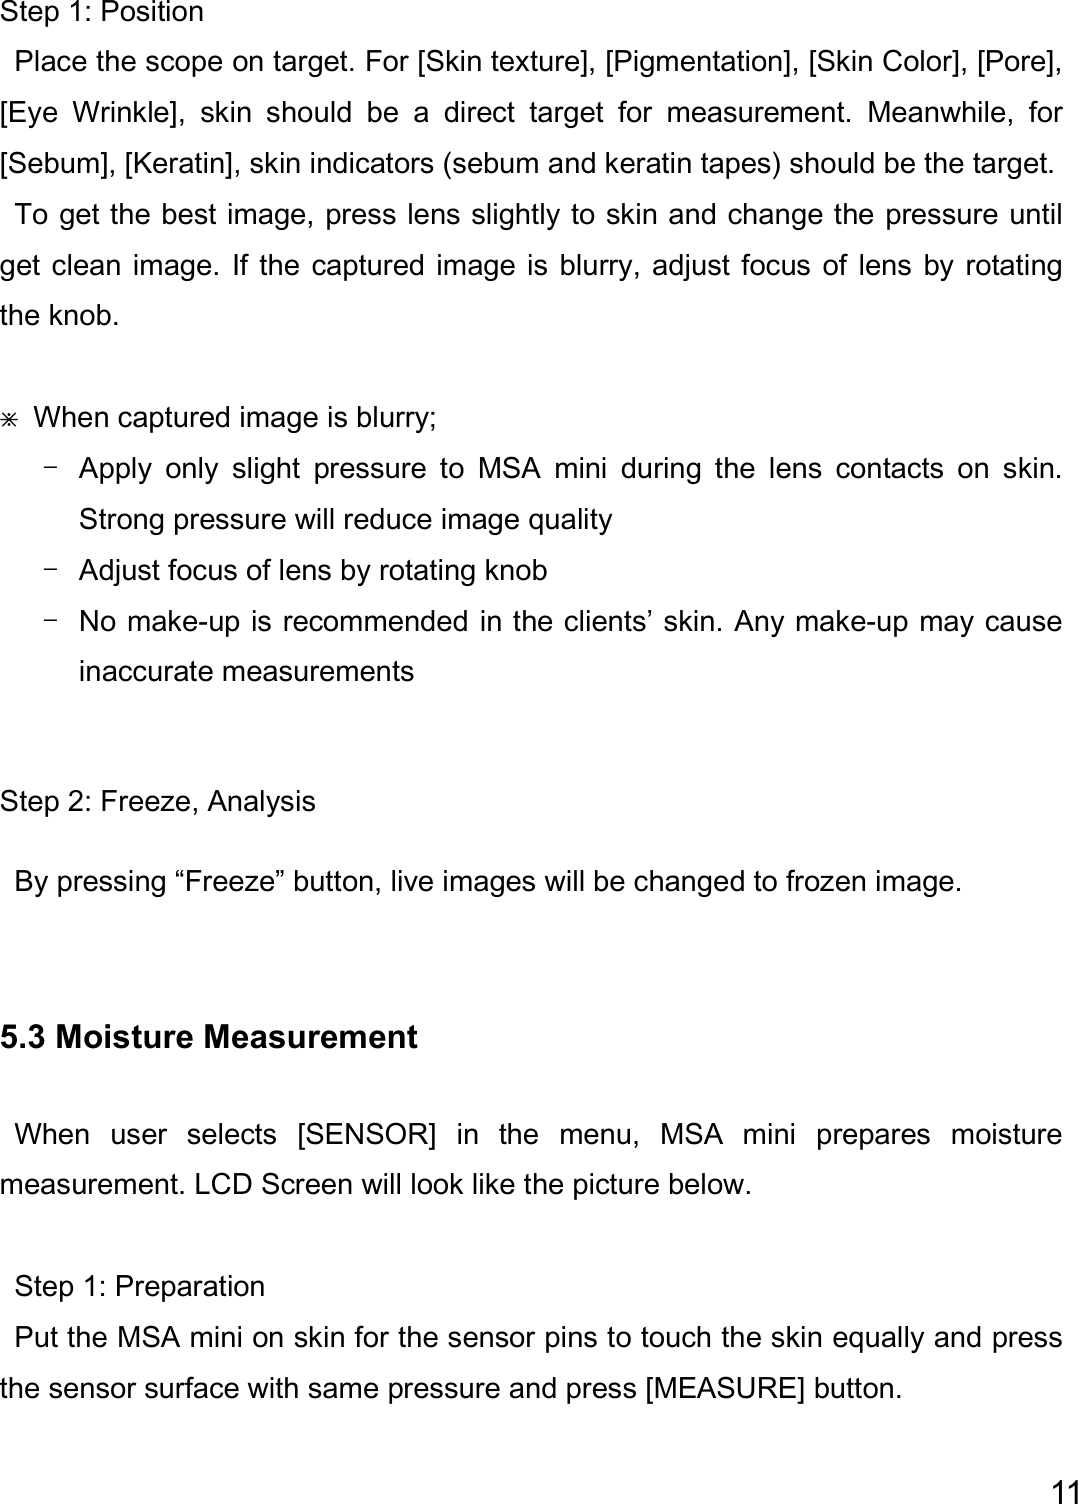  11  Step 1: Position   Place the scope on target. For [Skin texture], [Pigmentation], [Skin Color], [Pore], [Eye  Wrinkle],  skin  should  be  a  direct  target  for  measurement.  Meanwhile,  for [Sebum], [Keratin], skin indicators (sebum and keratin tapes) should be the target.     To get the best image, press lens slightly to skin and change the pressure until get clean image. If the captured image is blurry, adjust focus of  lens by rotating the knob.  ⋇  When captured image is blurry; - Apply  only  slight  pressure  to  MSA  mini  during  the  lens  contacts  on  skin.   Strong pressure will reduce image quality - Adjust focus of lens by rotating knob - No make-up is recommended in the clients’ skin. Any make-up may cause inaccurate measurements  Step 2: Freeze, Analysis By pressing “Freeze” button, live images will be changed to frozen image.    5.3 Moisture Measurement  When  user  selects  [SENSOR]  in  the  menu,  MSA  mini  prepares  moisture measurement. LCD Screen will look like the picture below.    Step 1: Preparation Put the MSA mini on skin for the sensor pins to touch the skin equally and press the sensor surface with same pressure and press [MEASURE] button. 